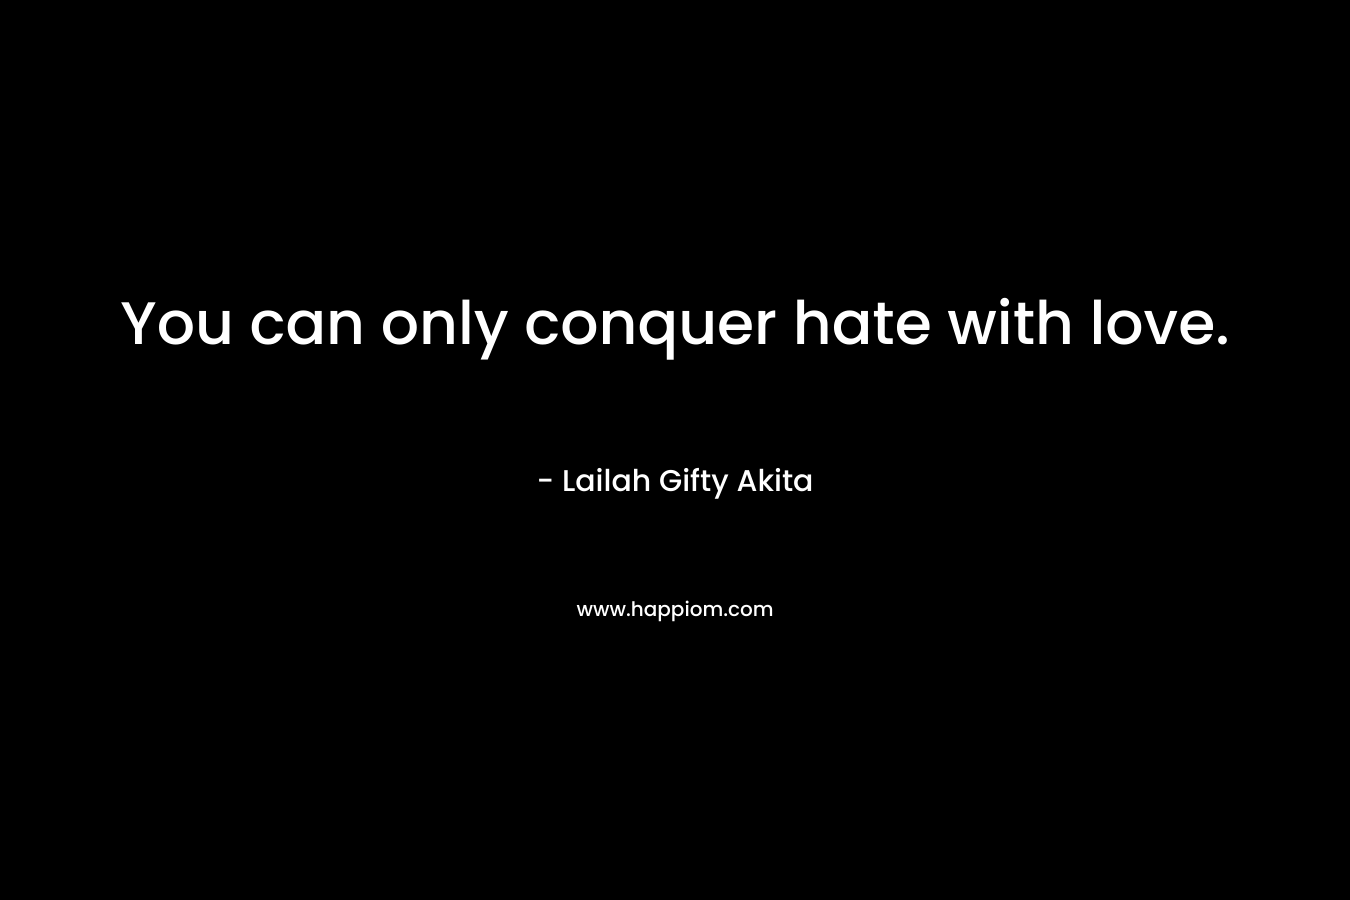 You can only conquer hate with love.